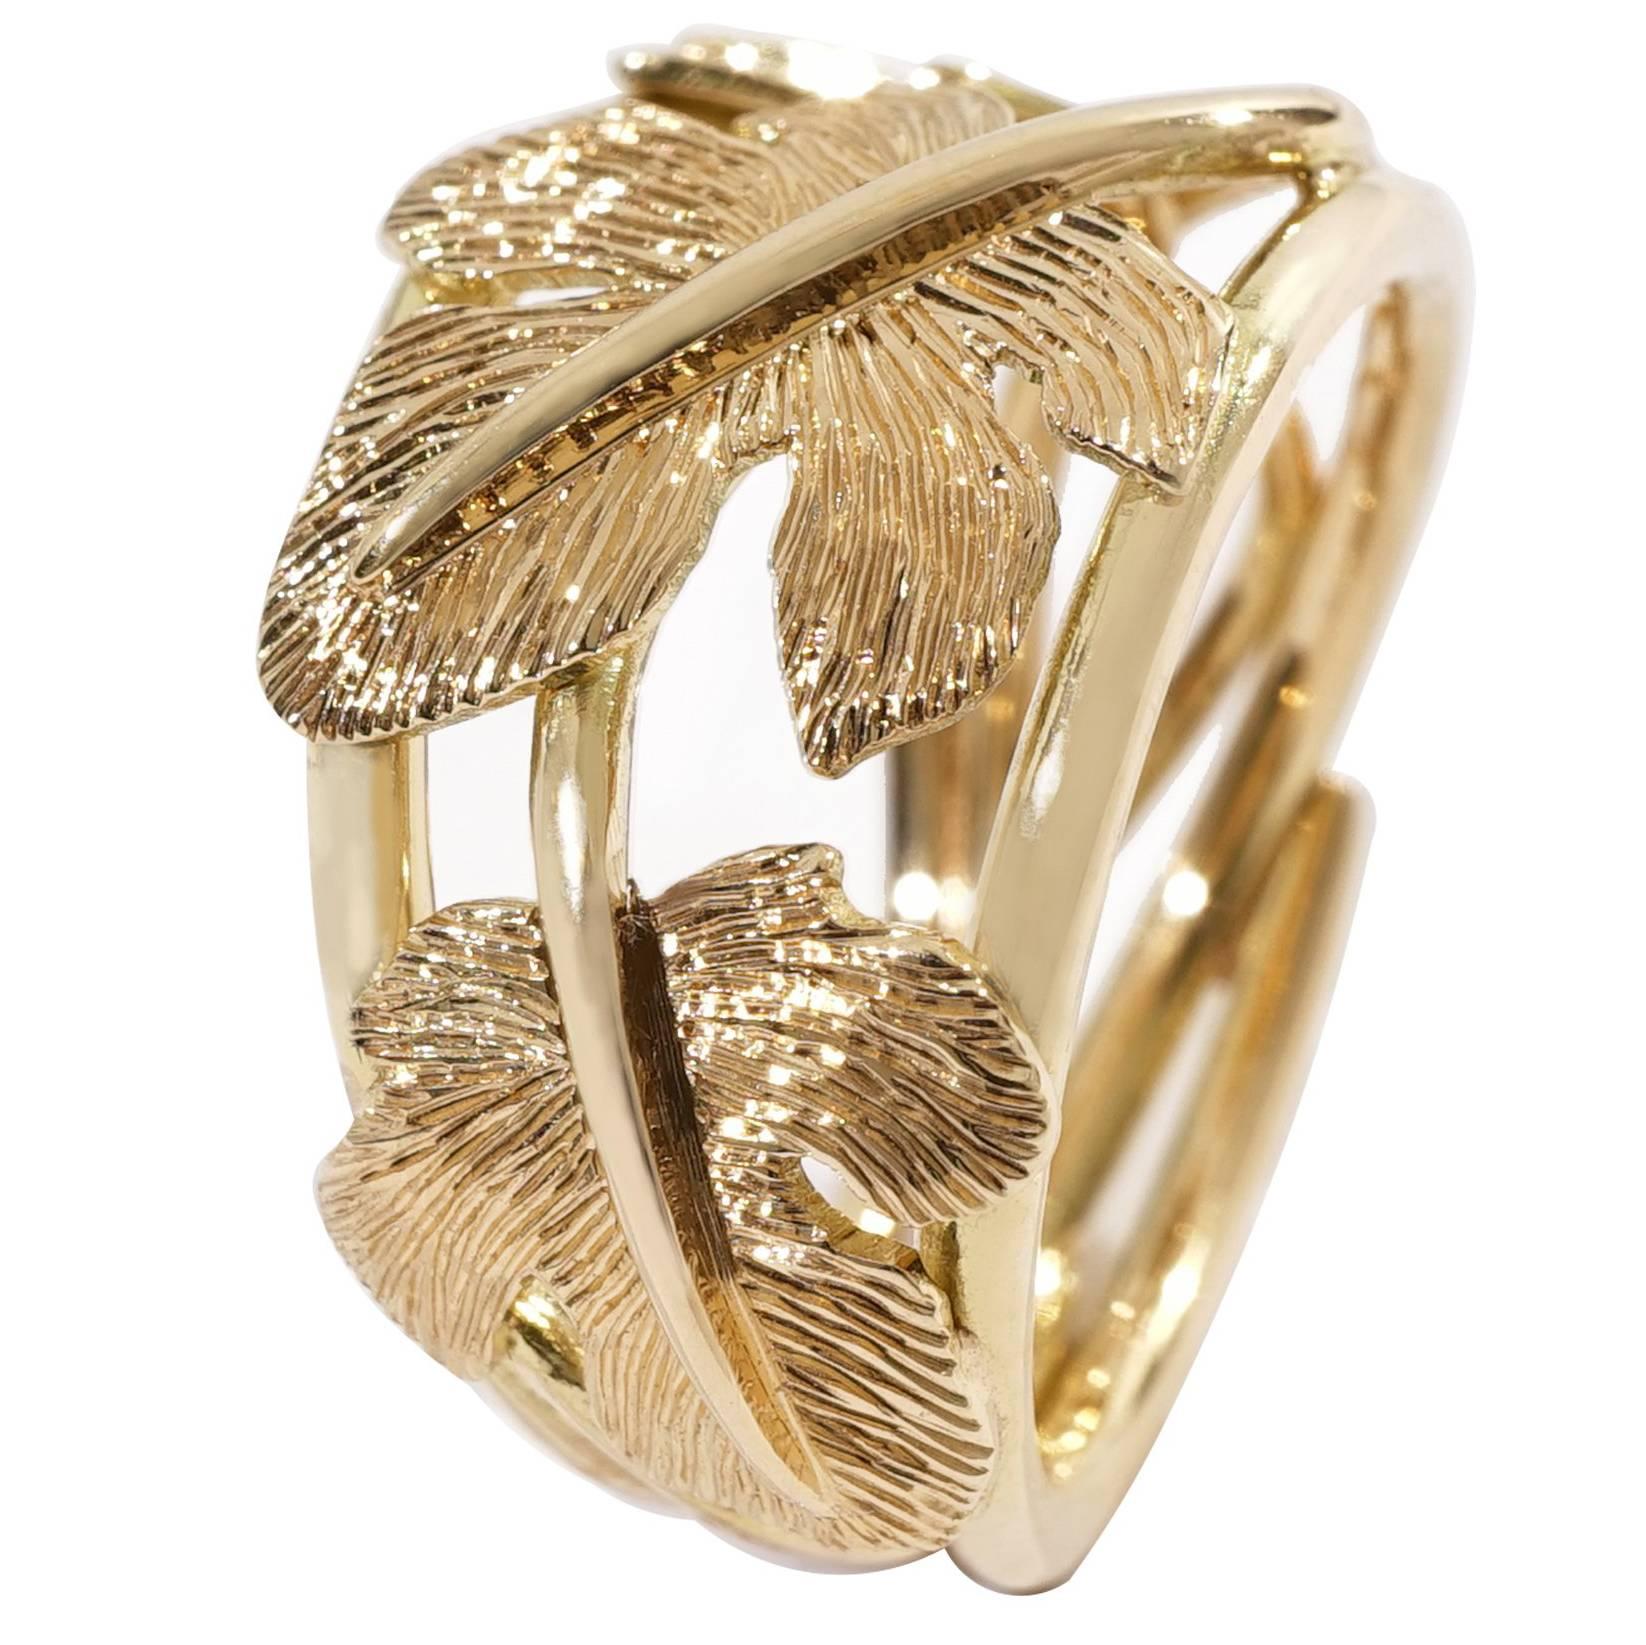 Coralie Van Caloen 18 Carat Gold Pinky Band Ring Hand Engraved Fig Leaves For Sale